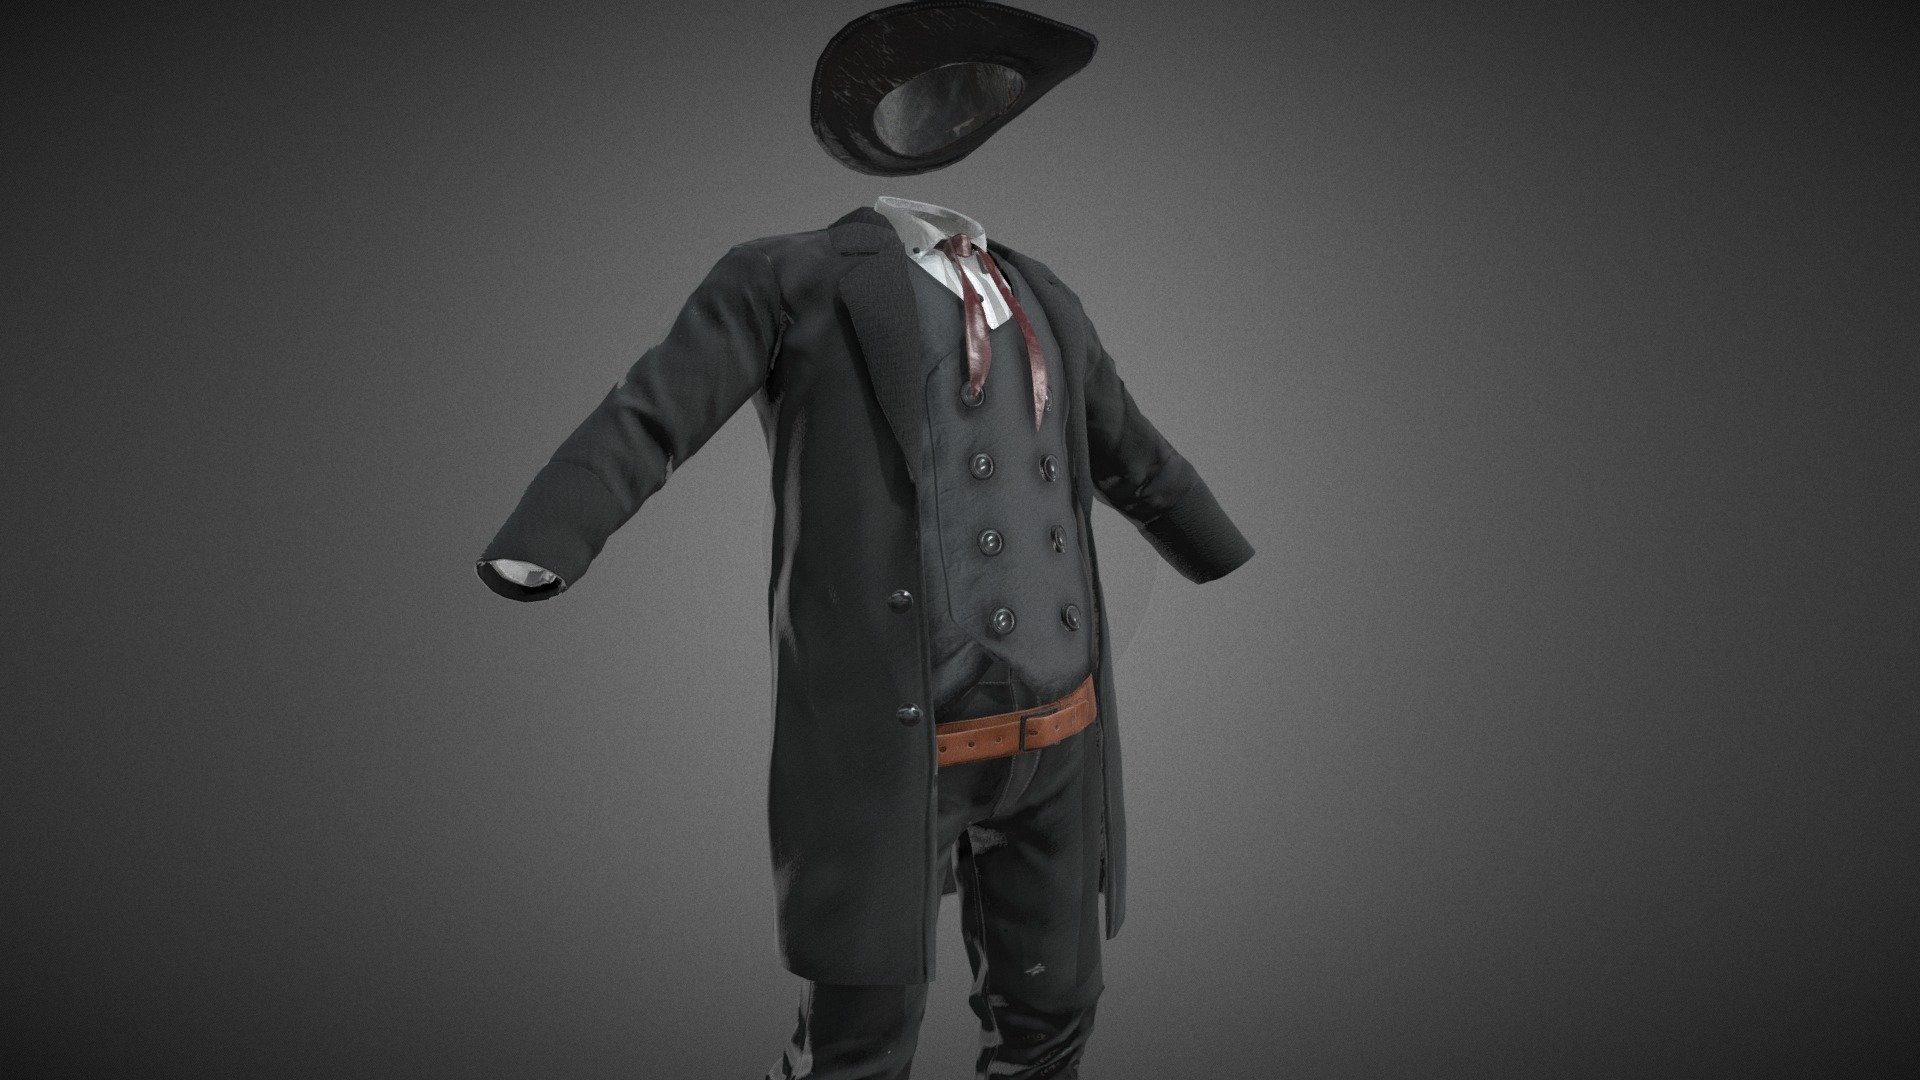 CG StudioX Present :
Cowboy Outfit lowpoly/PBR




This is Cowboy Outfit Comes with Specular and Metalness PBR.

The photo been rendered using Marmoset Toolbag 3 (real time game engine )


Features :



Comes with Specular and Metalness PBR 4K texture .

Good topology.

Low polygon geometry.

The Model is prefect for game for both Specular workflow as in Unity and Metalness as in Unreal engine .

The model also rendered using Marmoset Toolbag 3 with both Specular and Metalness PBR and also included in the product with the full texture.

The product has ID map in every part for changing any part in the model .

The texture can be easily adjustable .


Texture :



ALL Texture [Albedo -Normal-Metalness -Roughness-Gloss-Specular-ID-AO] (4096*4096)

Five objects (Pants-Coat-Hat -shirt-vest) each one has it own uv set and textures.


Files :
Marmoset Toolbag 3 ,Maya,,FBX,OBj with all the textures.




Contact me for if you have any questions.
 - Cowboy Outfit - Buy Royalty Free 3D model by CG StudioX (@CG_StudioX) 3d model